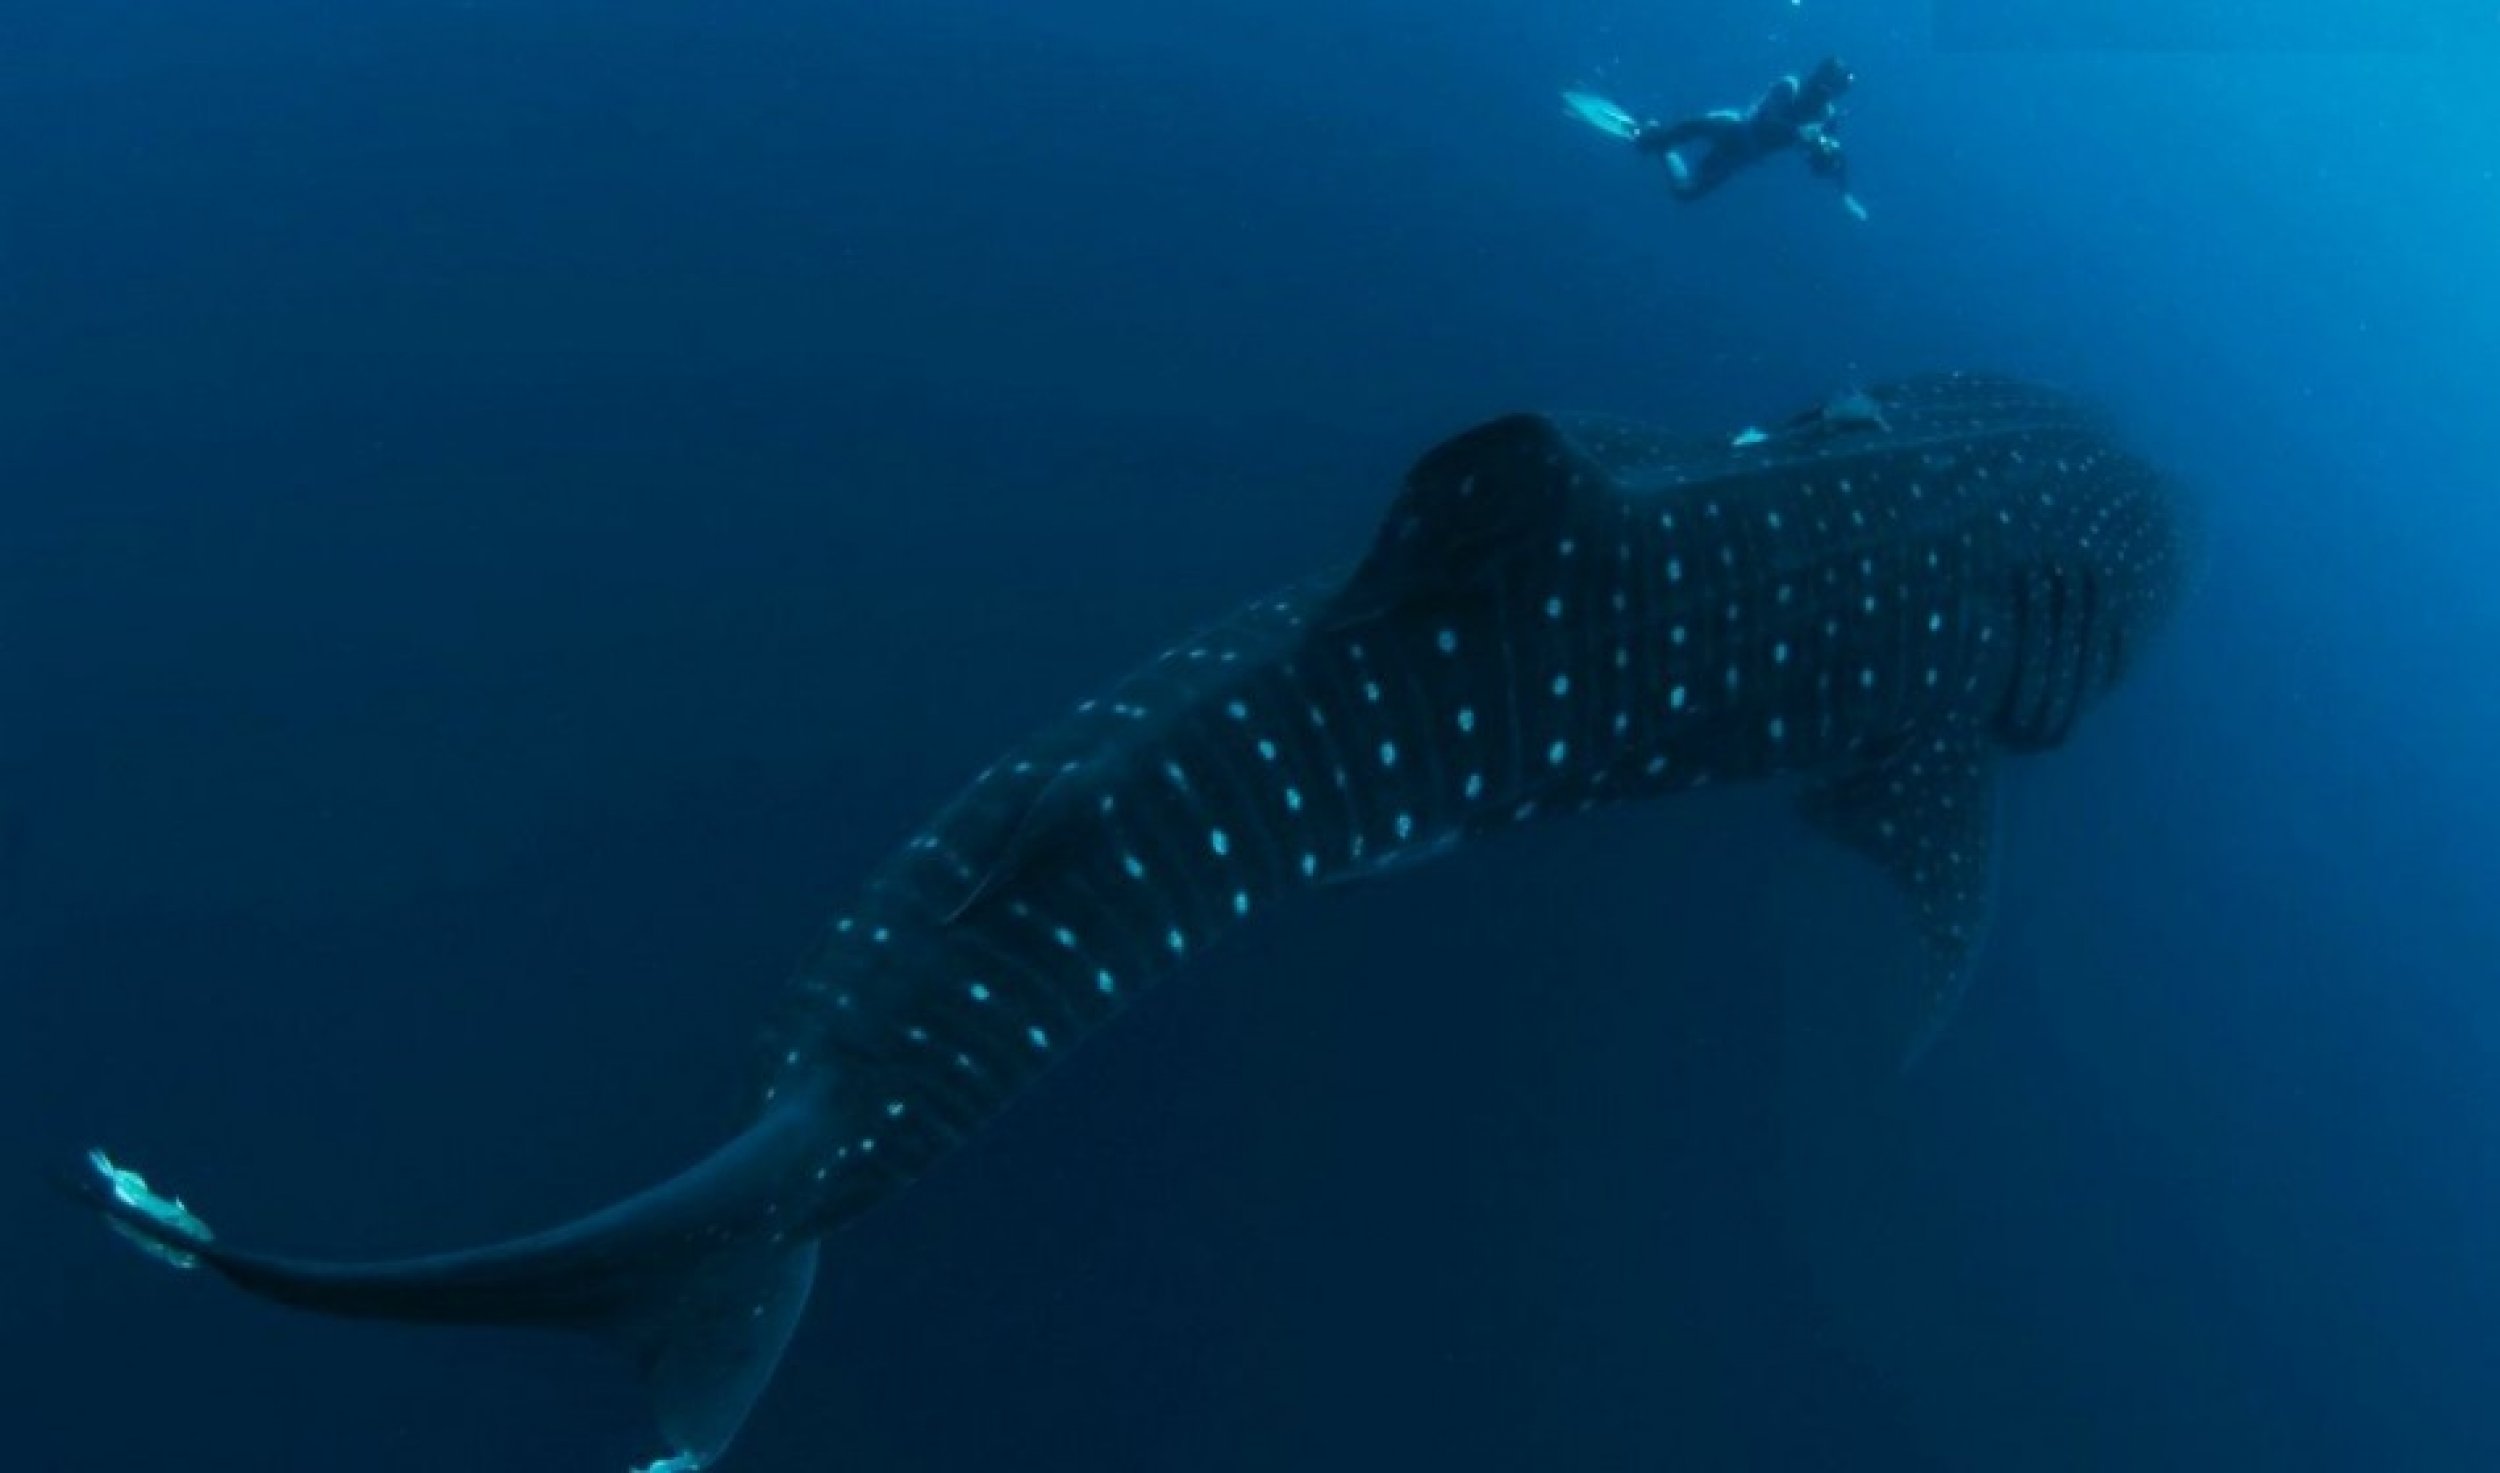 Most Spectacular Photos of Worlds Largest Fish Whale Sharks Almost Swallowing Diver